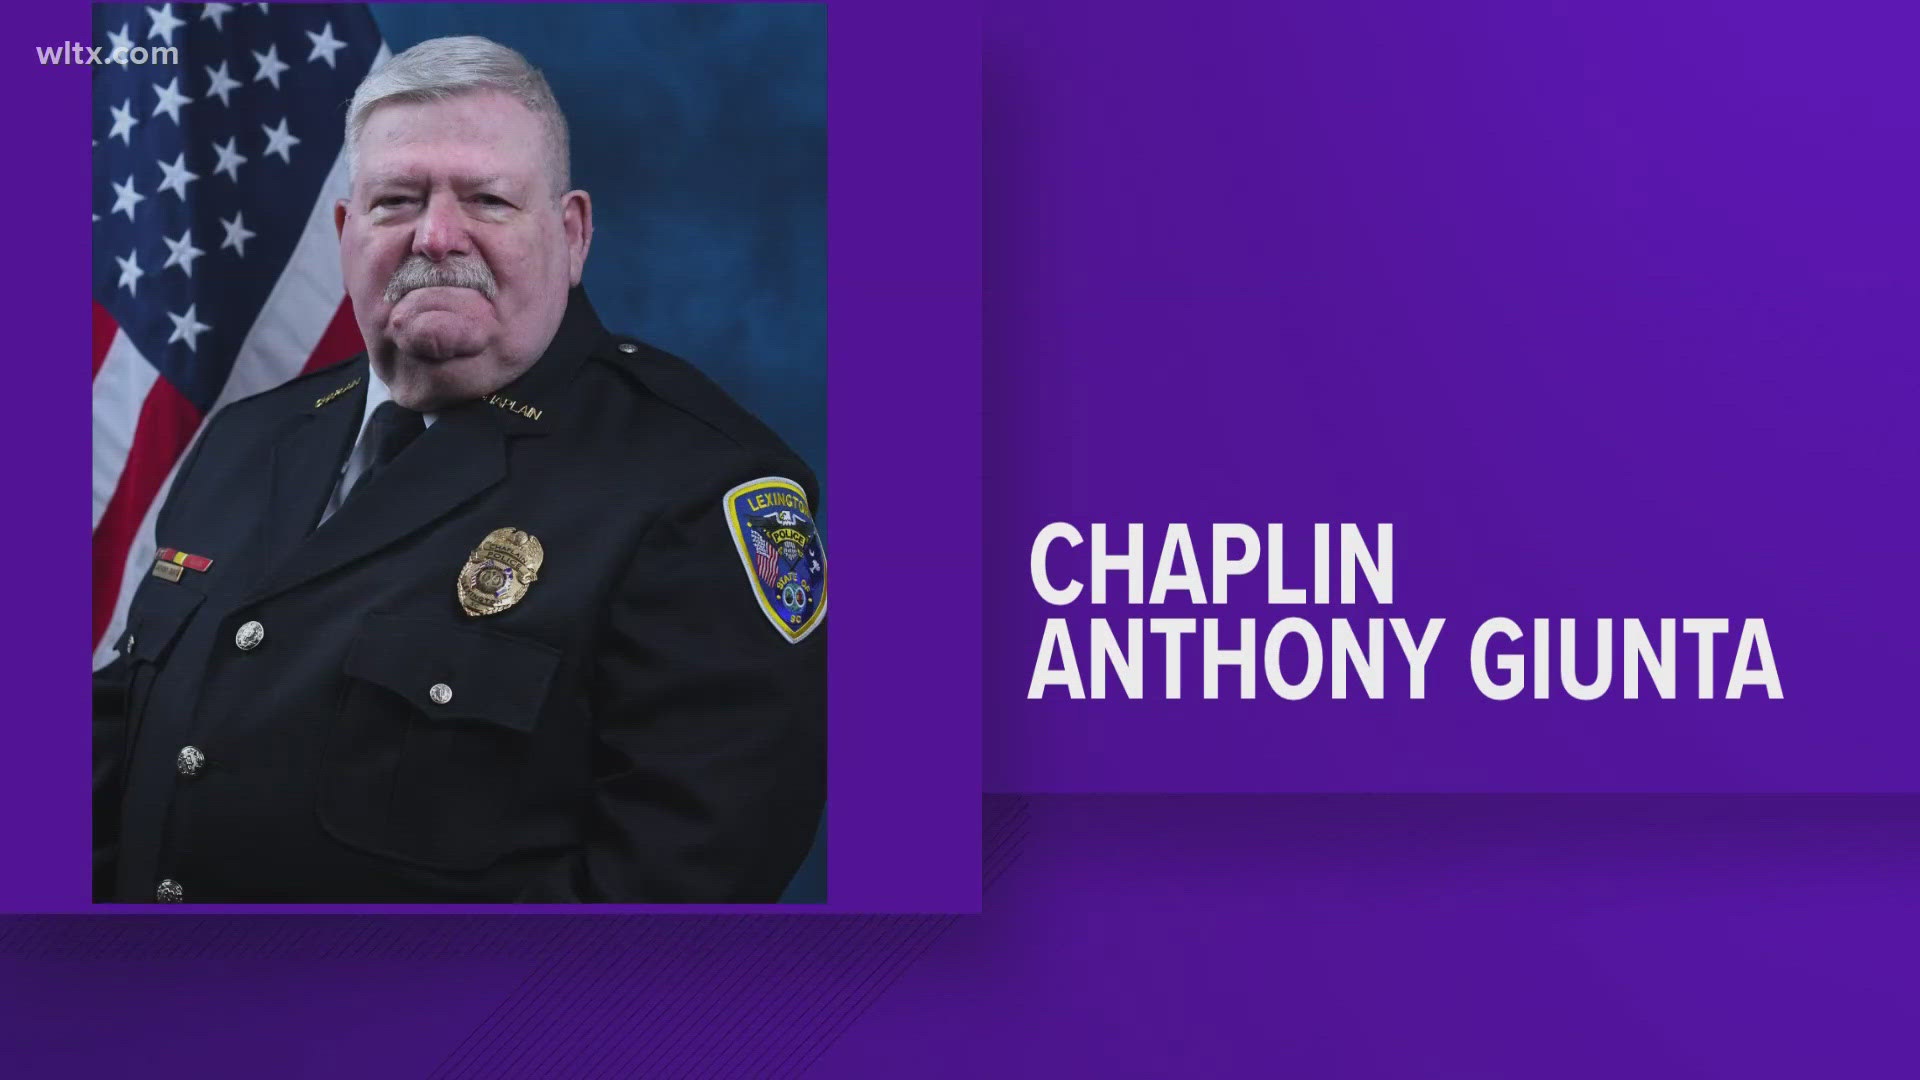 Chaplain Anthony Giunta served the Lexington Police department and the Irmo Fire District.